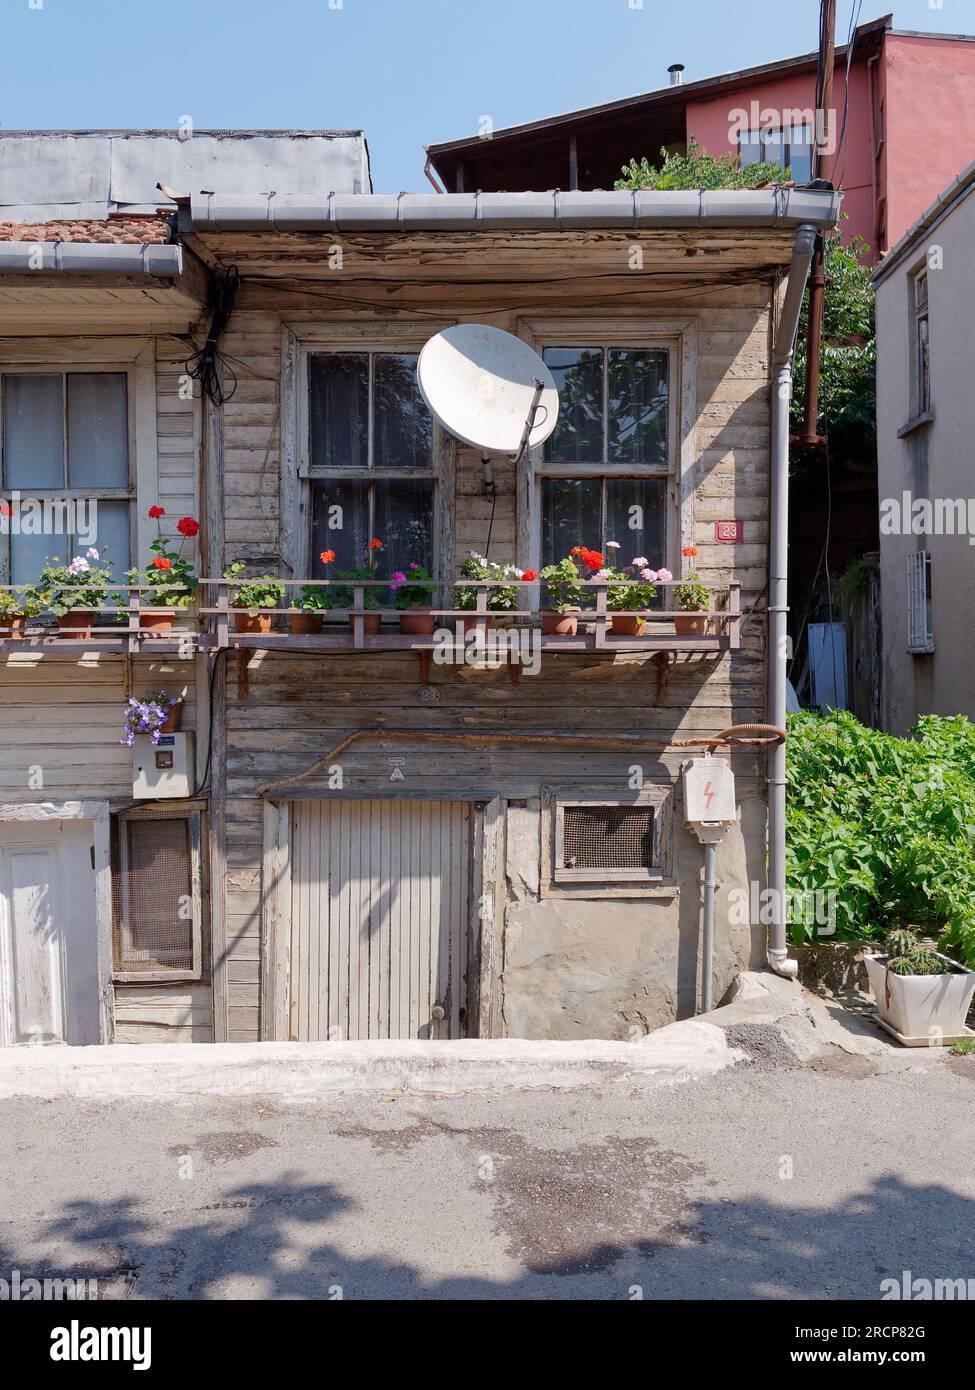 Dilapidated but quaint house in Anadolu with a wooden window ledge full of flower pots and a satellite dish above. Istanbul, Turkey Stock Photo